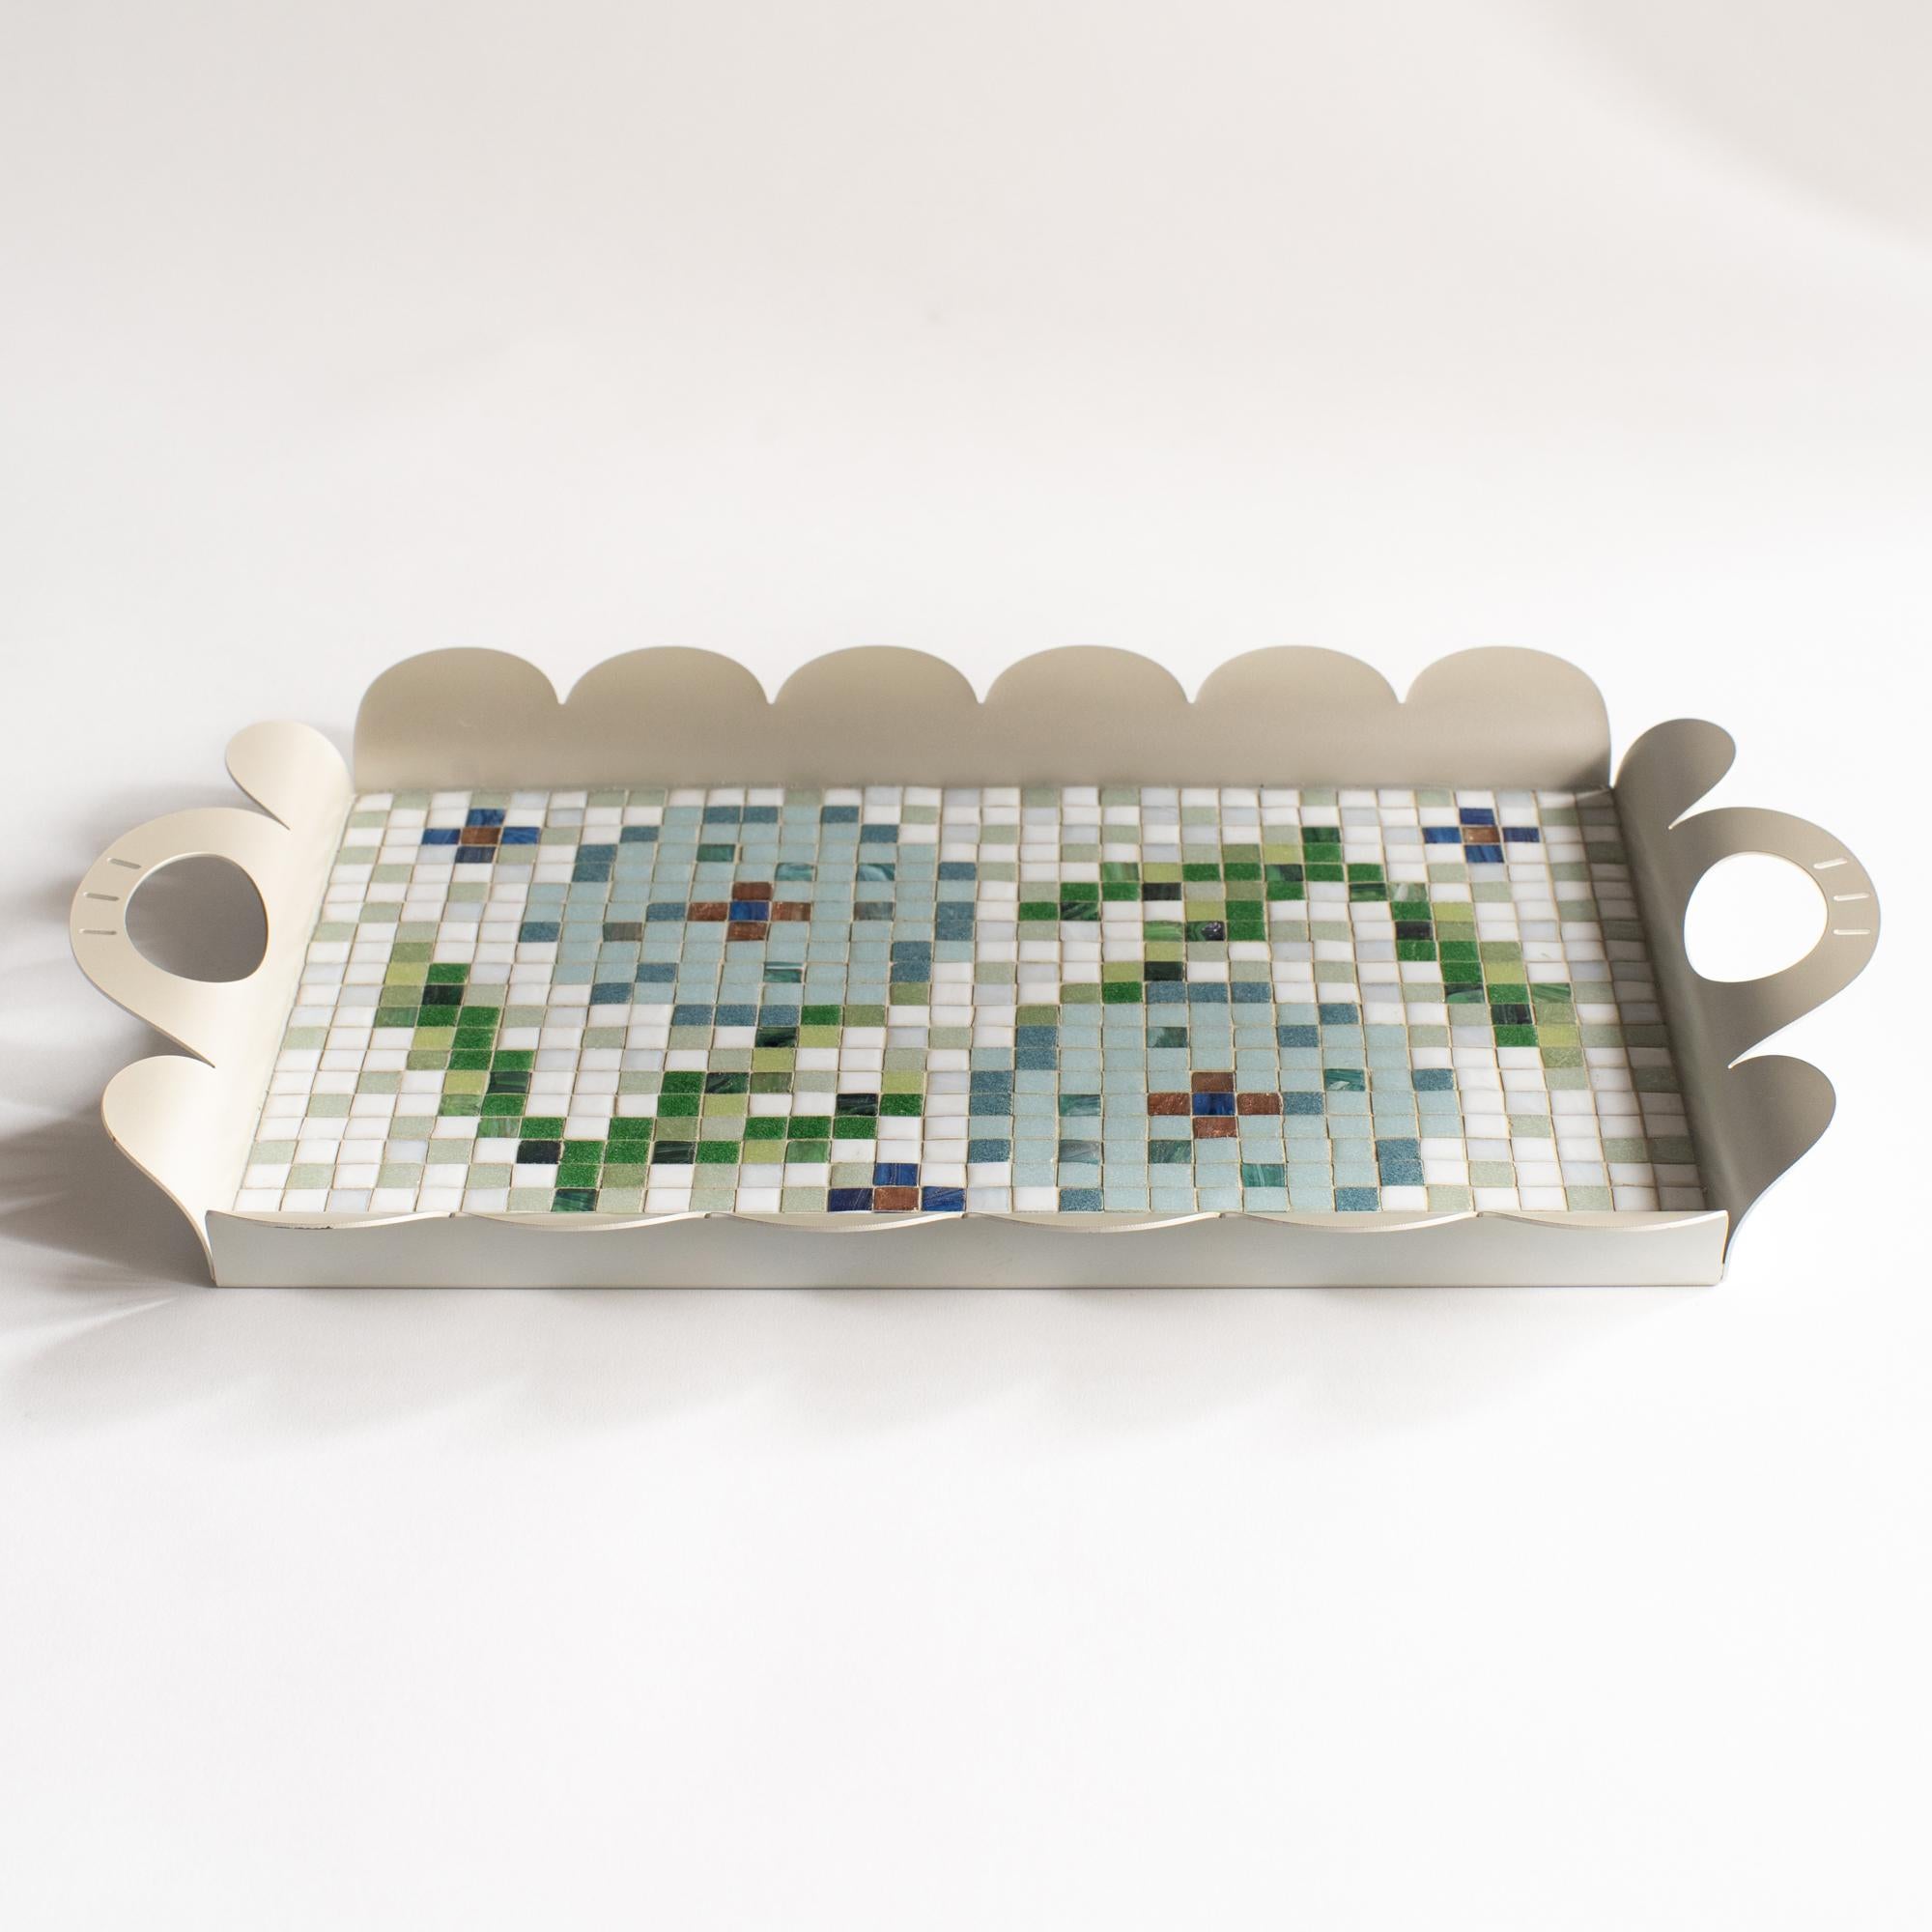 Alessandro Mendini Recinto Jazz tray collaborated with Bisazza glass mosaic.
Limited numbered edition published in 2000. Never used condition.